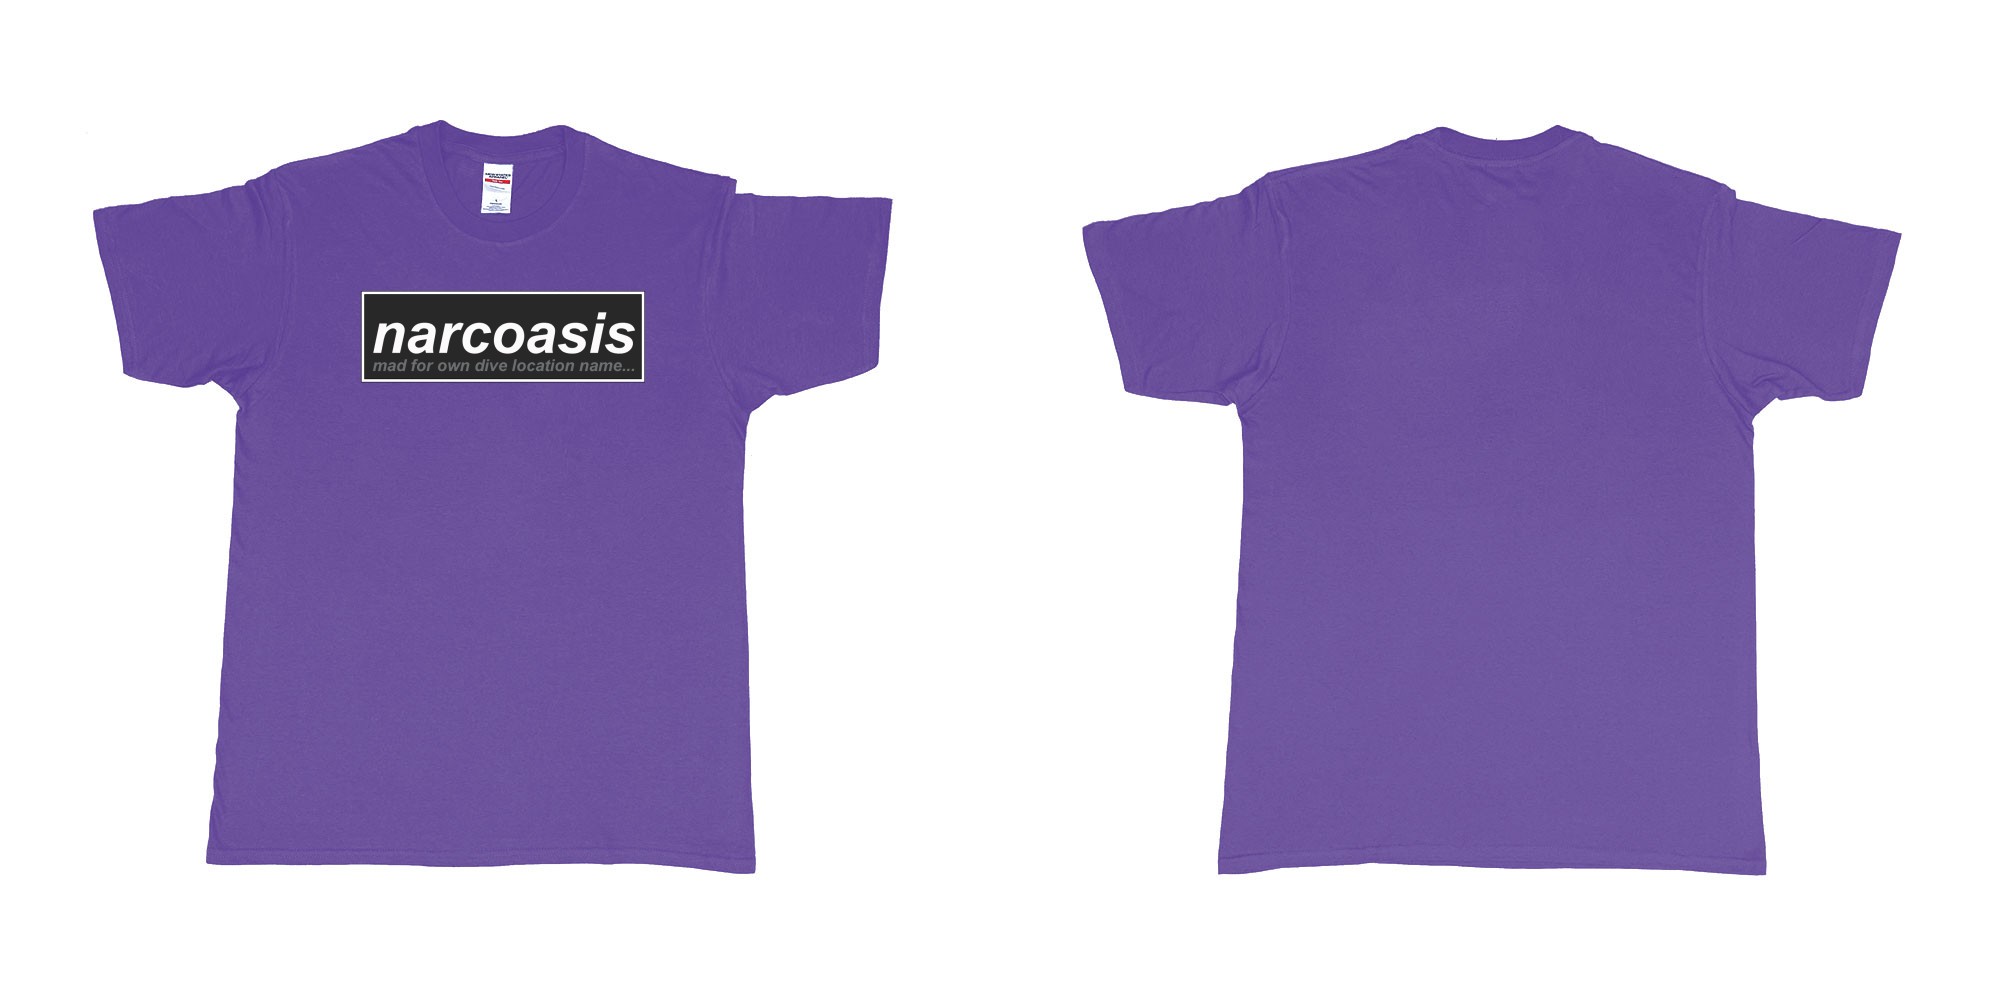 Custom tshirt design narcoasis mad for own dive location name in fabric color purple choice your own text made in Bali by The Pirate Way